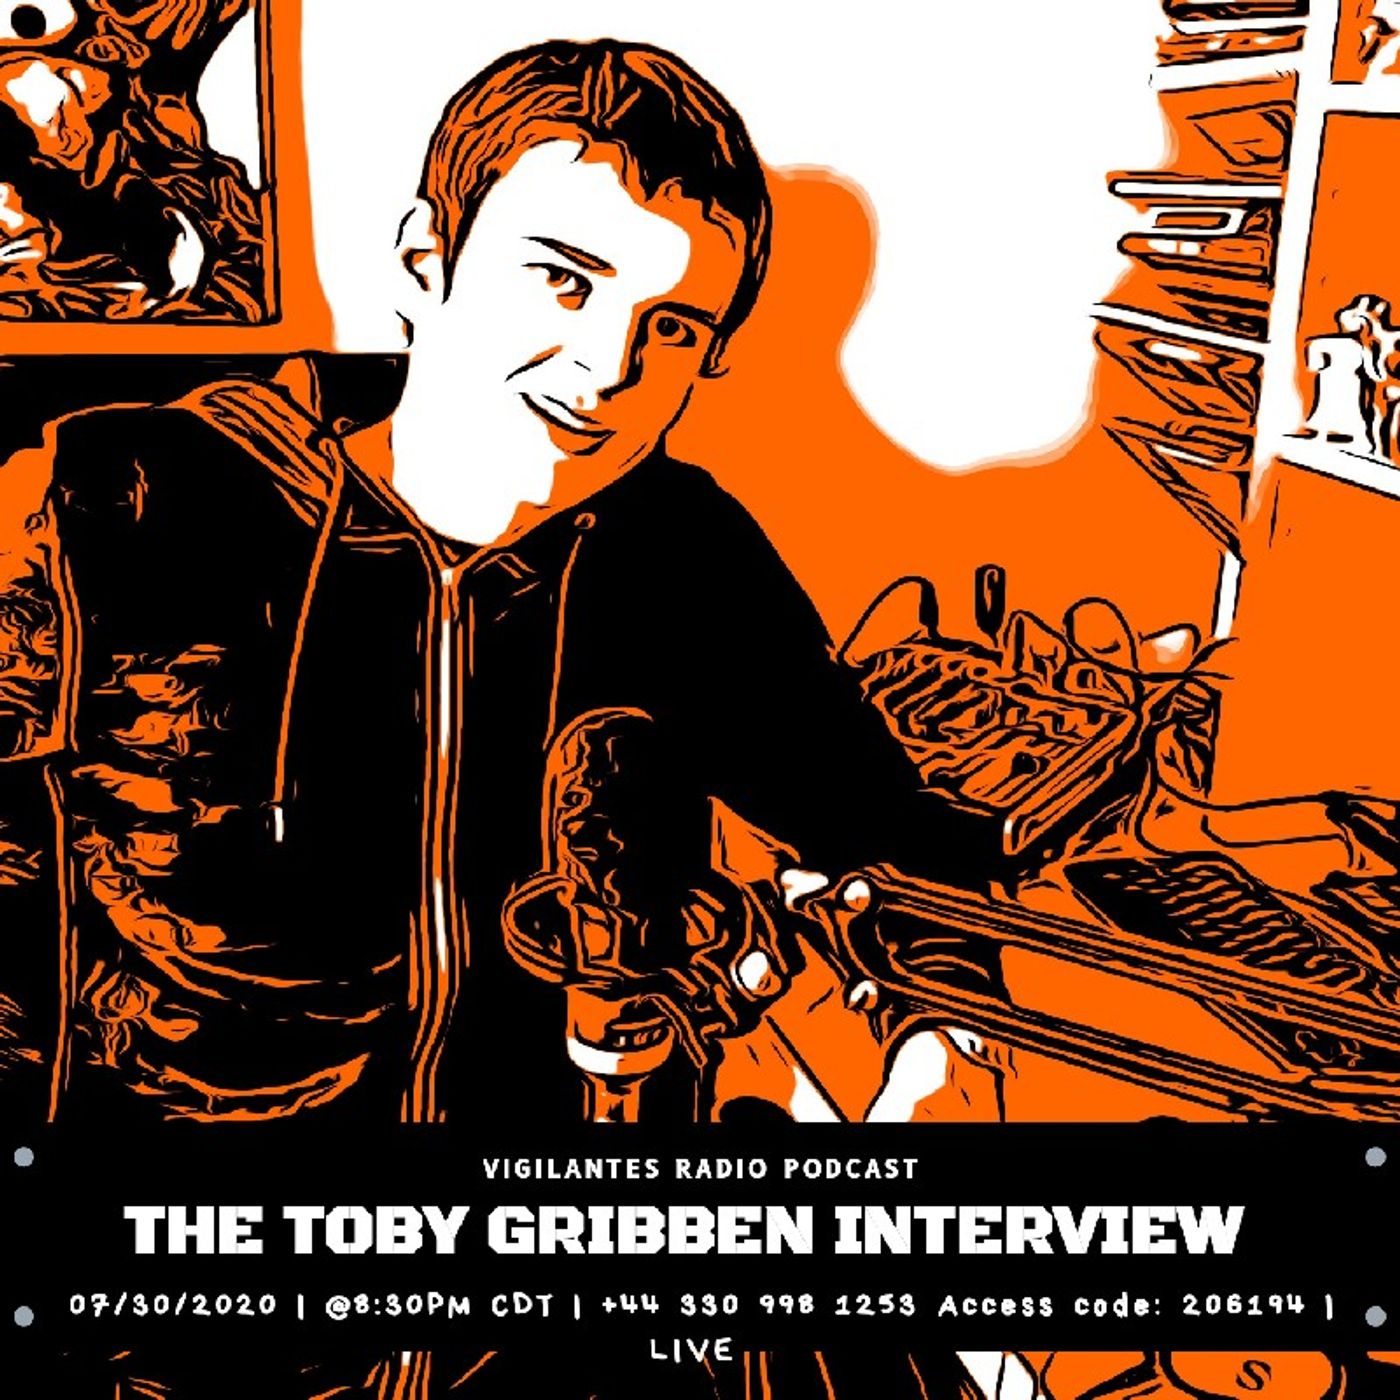 The Toby Gribben Interview. Image